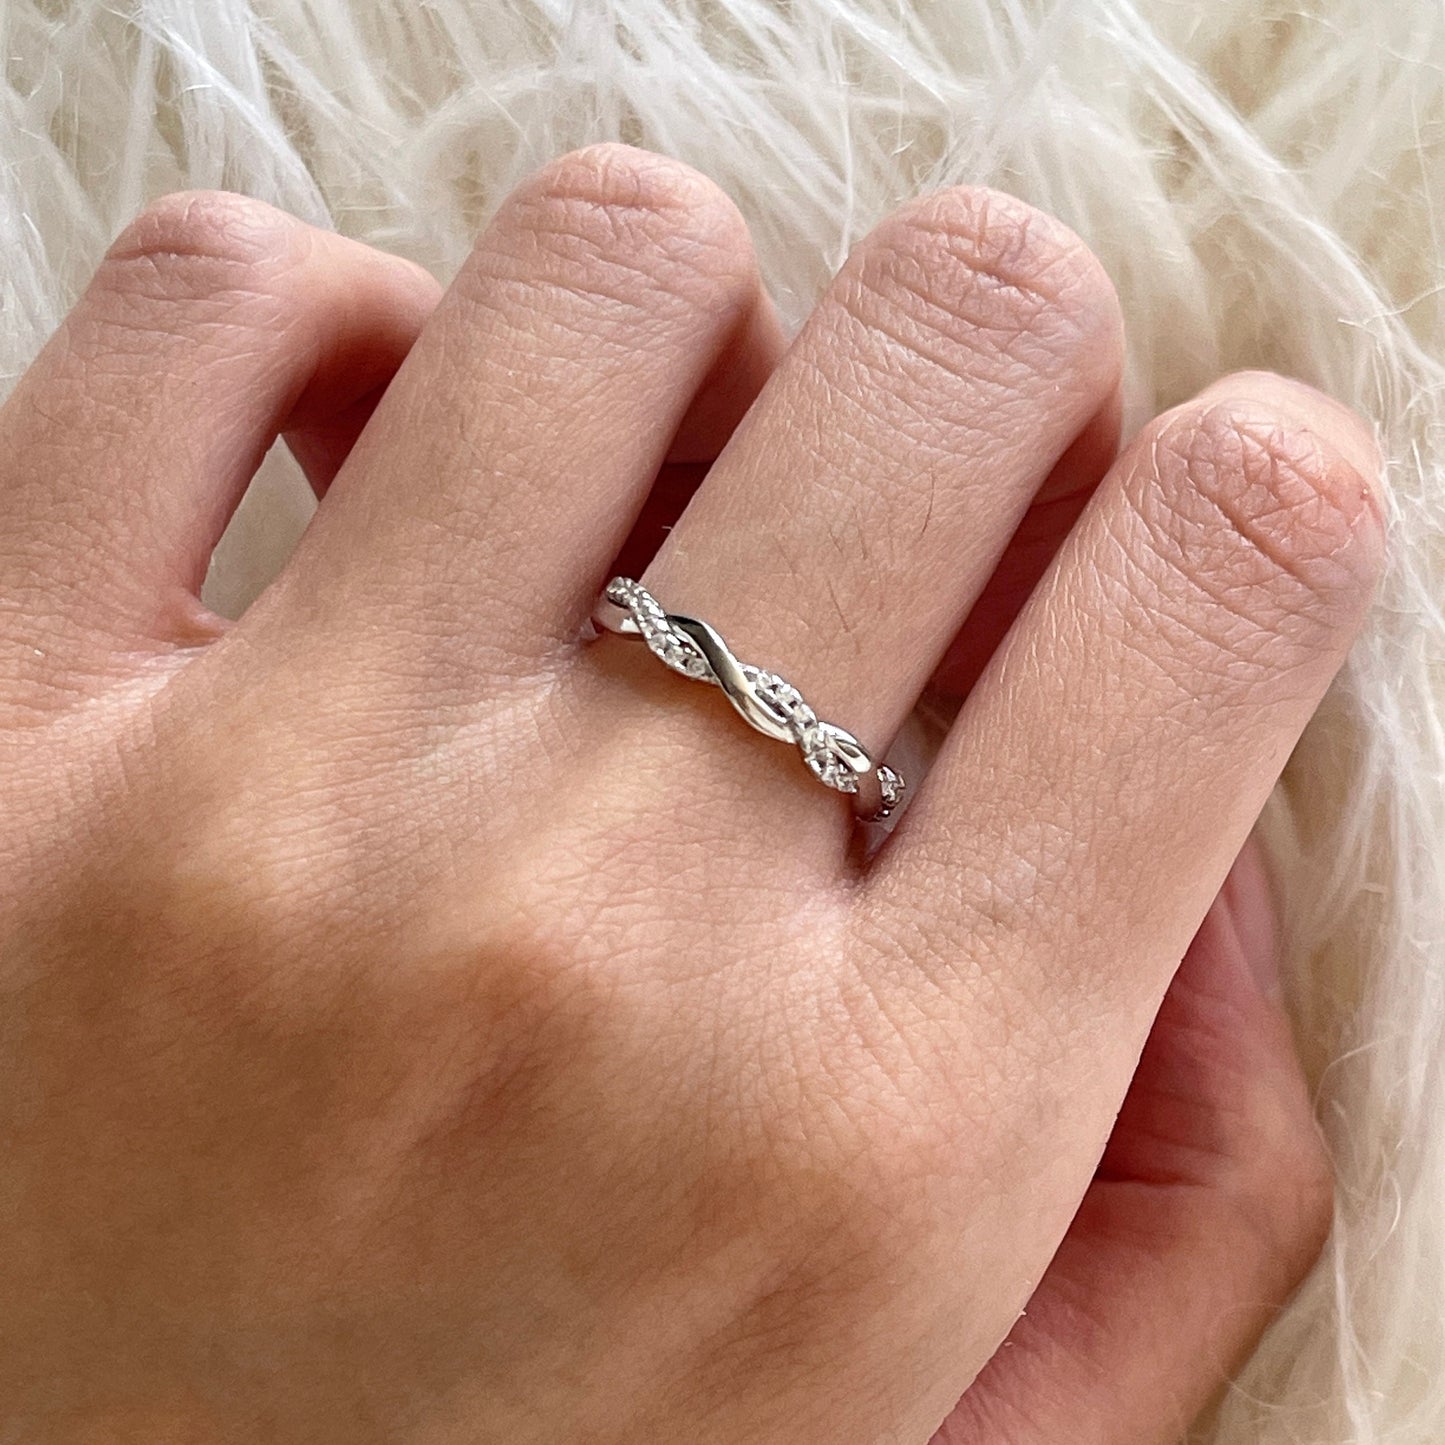 Twisted infinity ring, Mobius ring, Paved daimond ring, Silver vine ring, Infinity enegagement ring, Interlocking promise anniversary ring